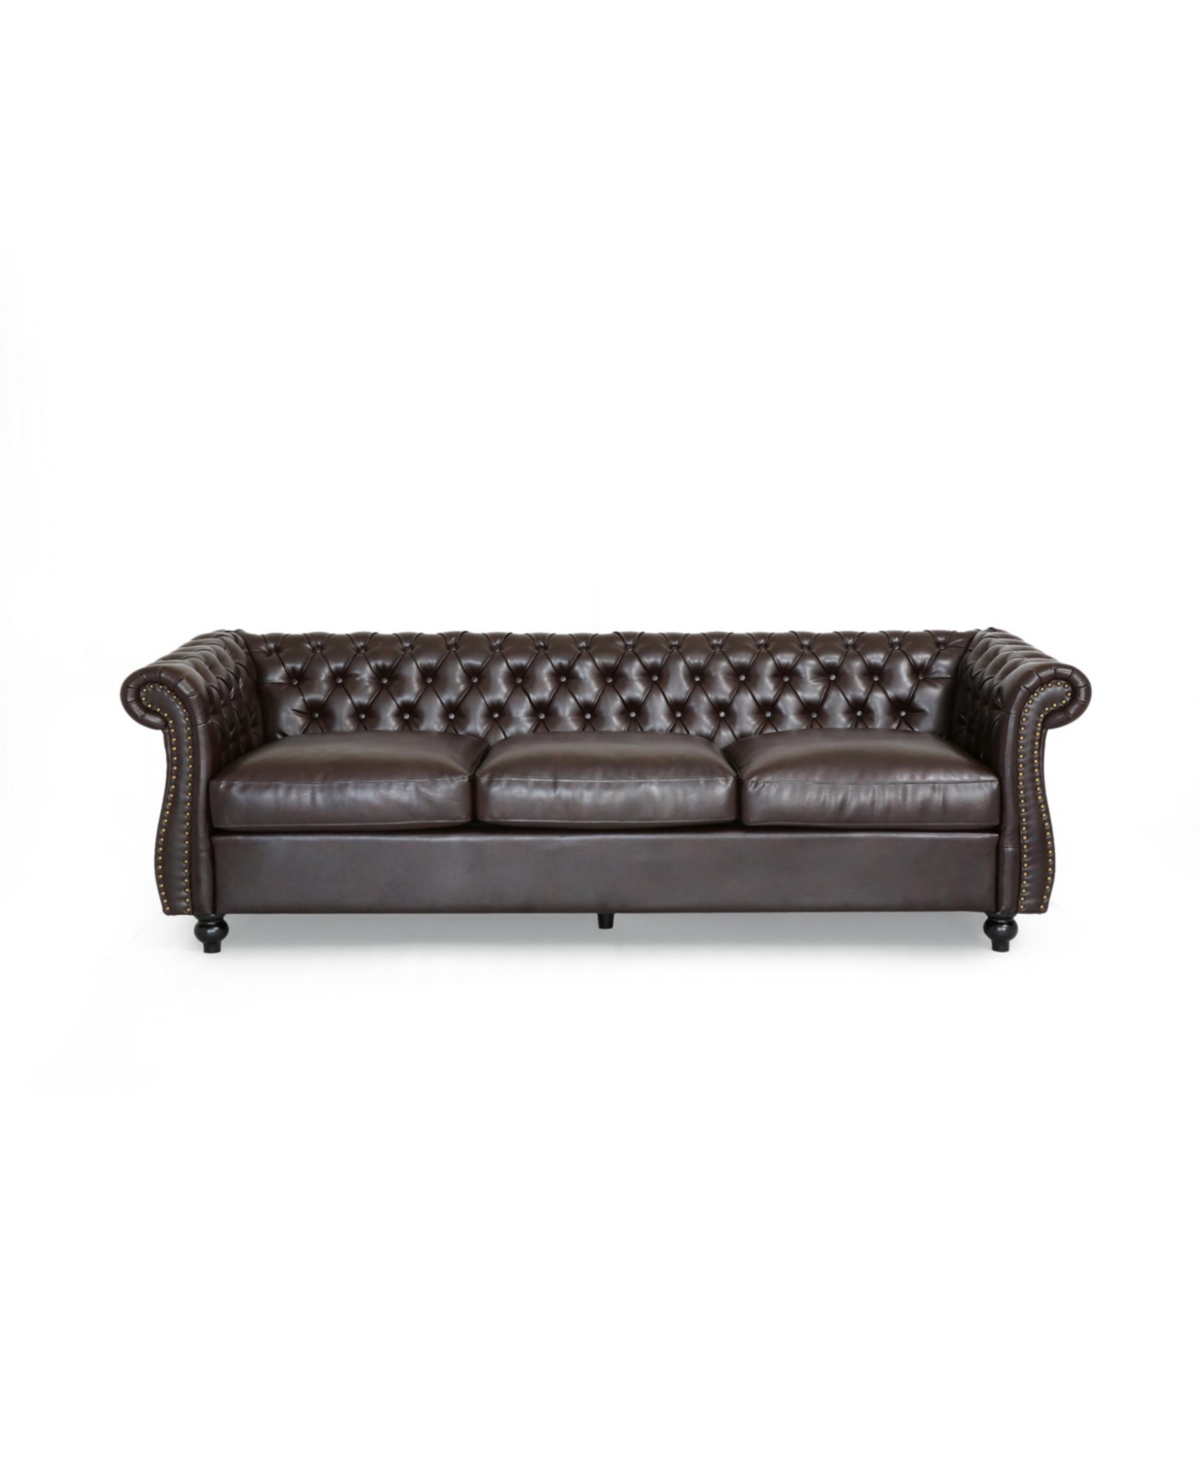 Noble House Somerville Chesterfield Tufted Sofa With Scroll Arms In Brown